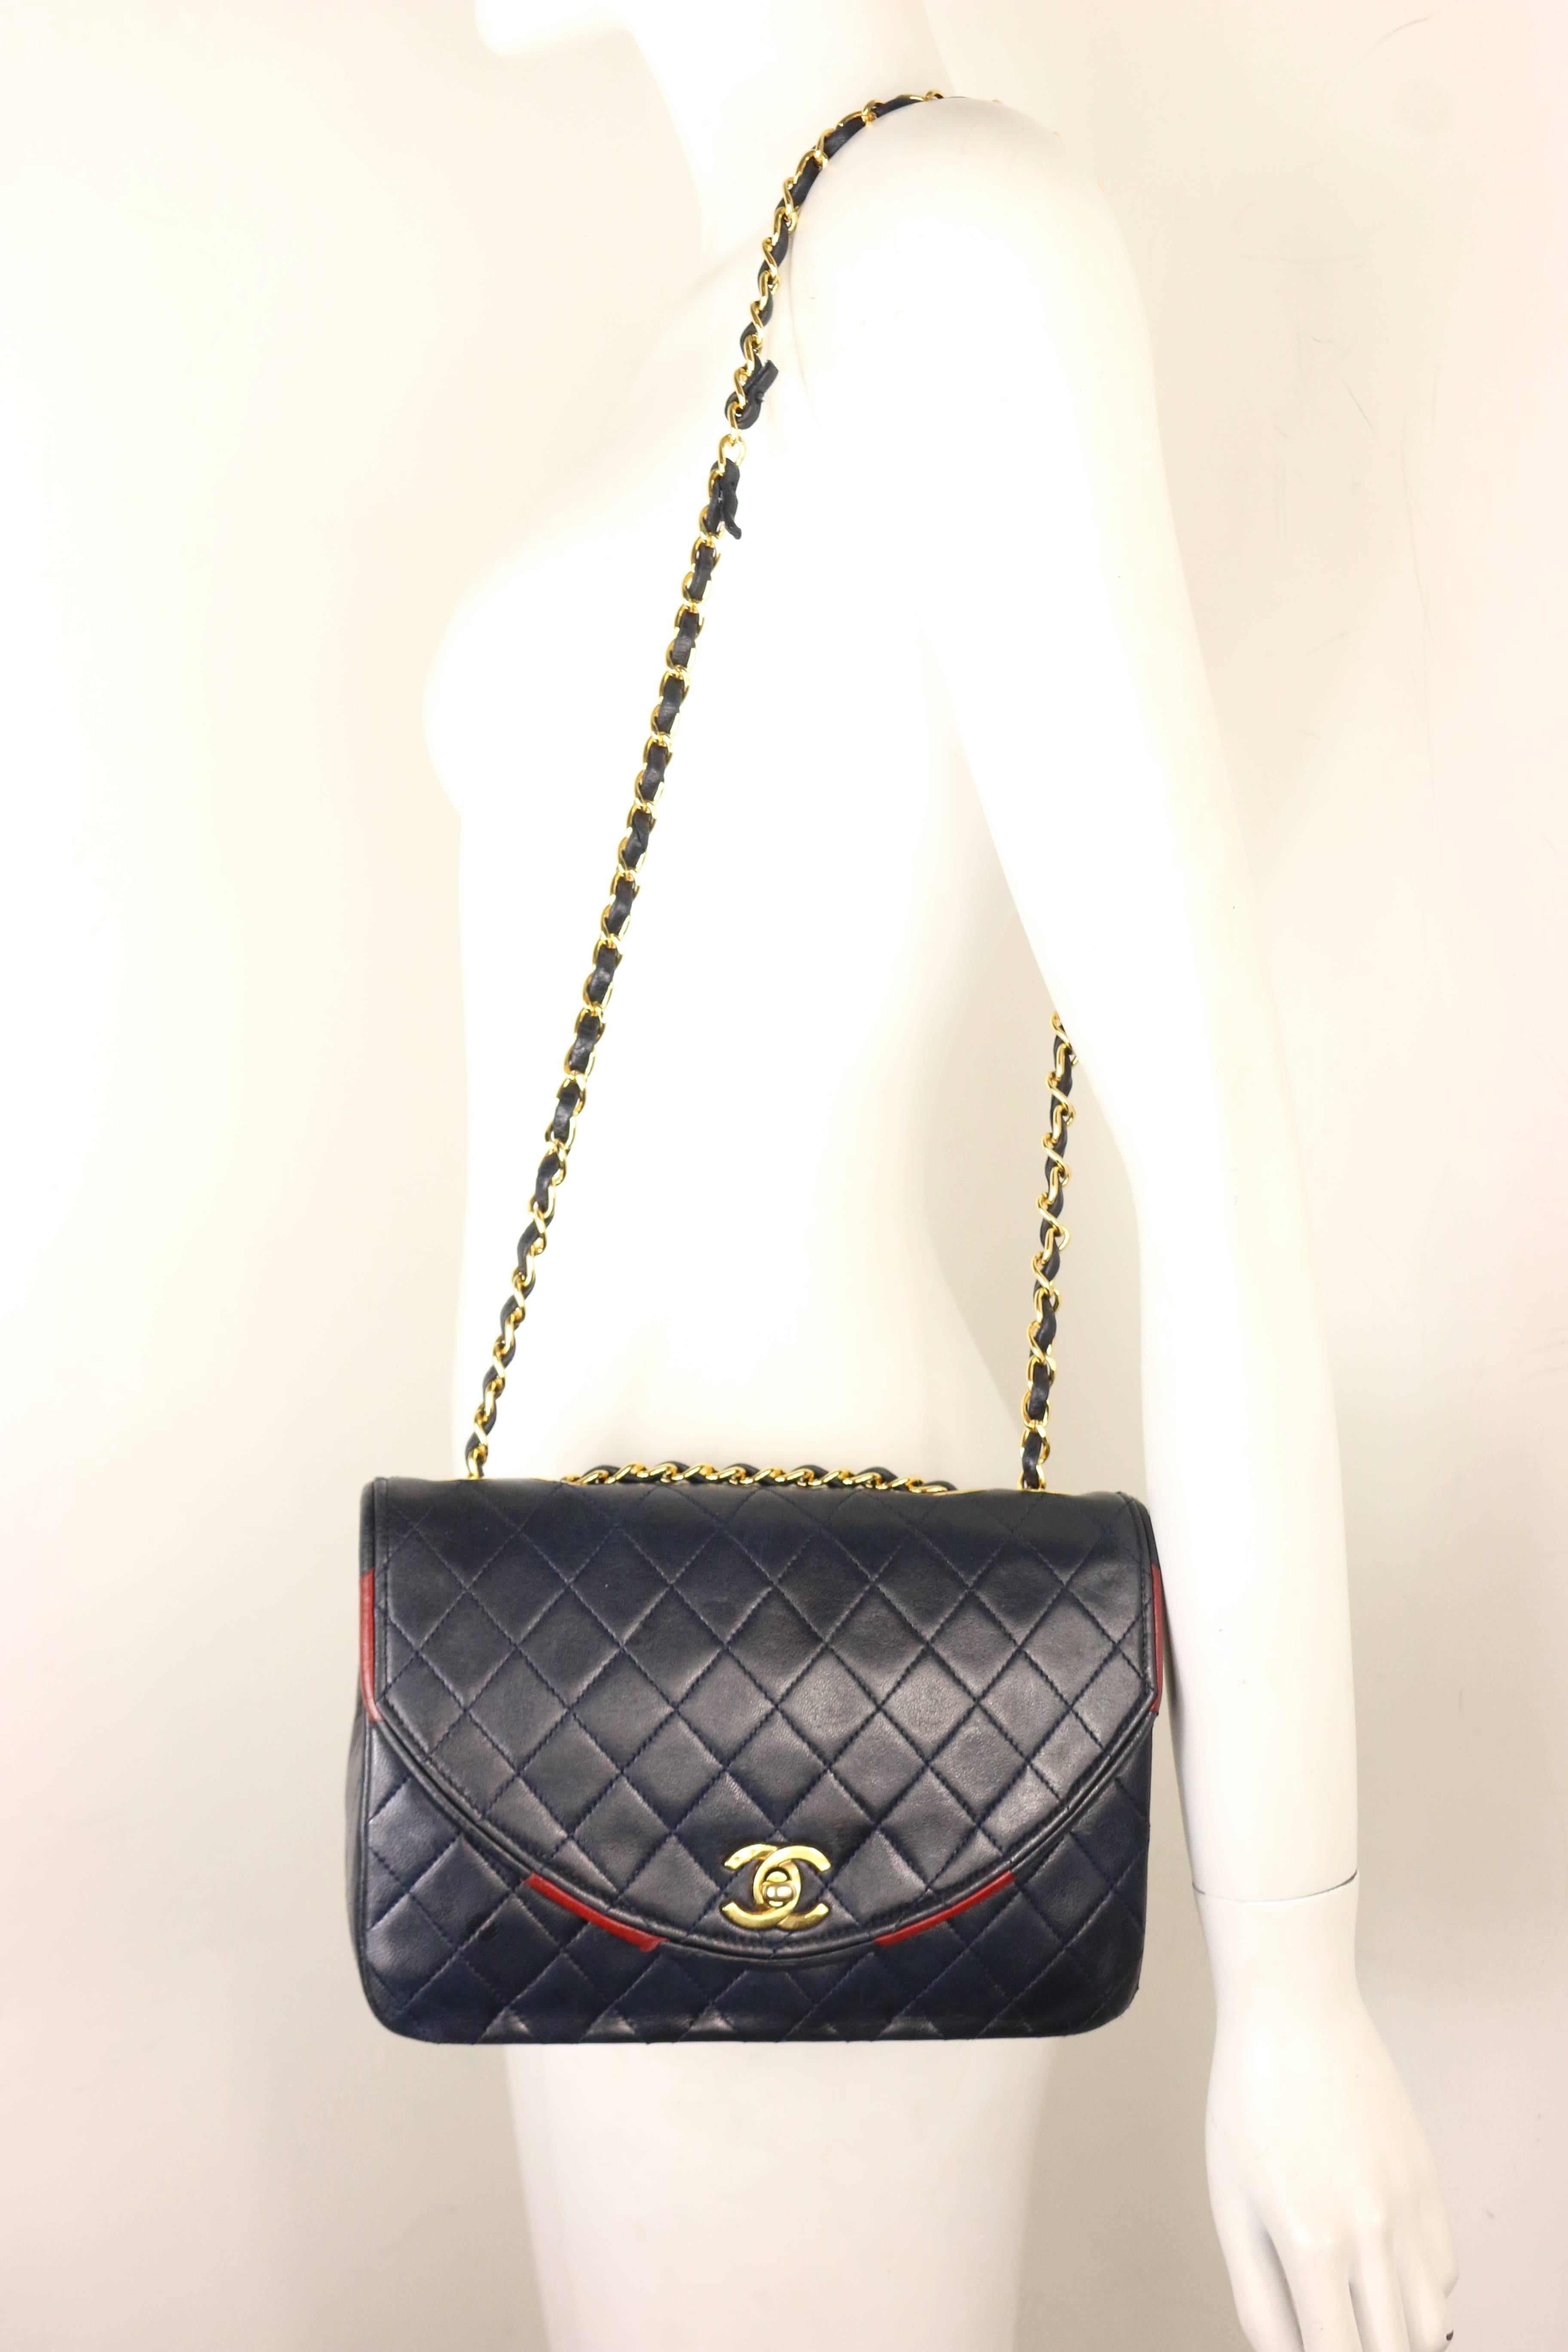 Chanel Classic Navy Quilted Lambskin Leather Red / Navy Trim Flap Shoulder Bag  10